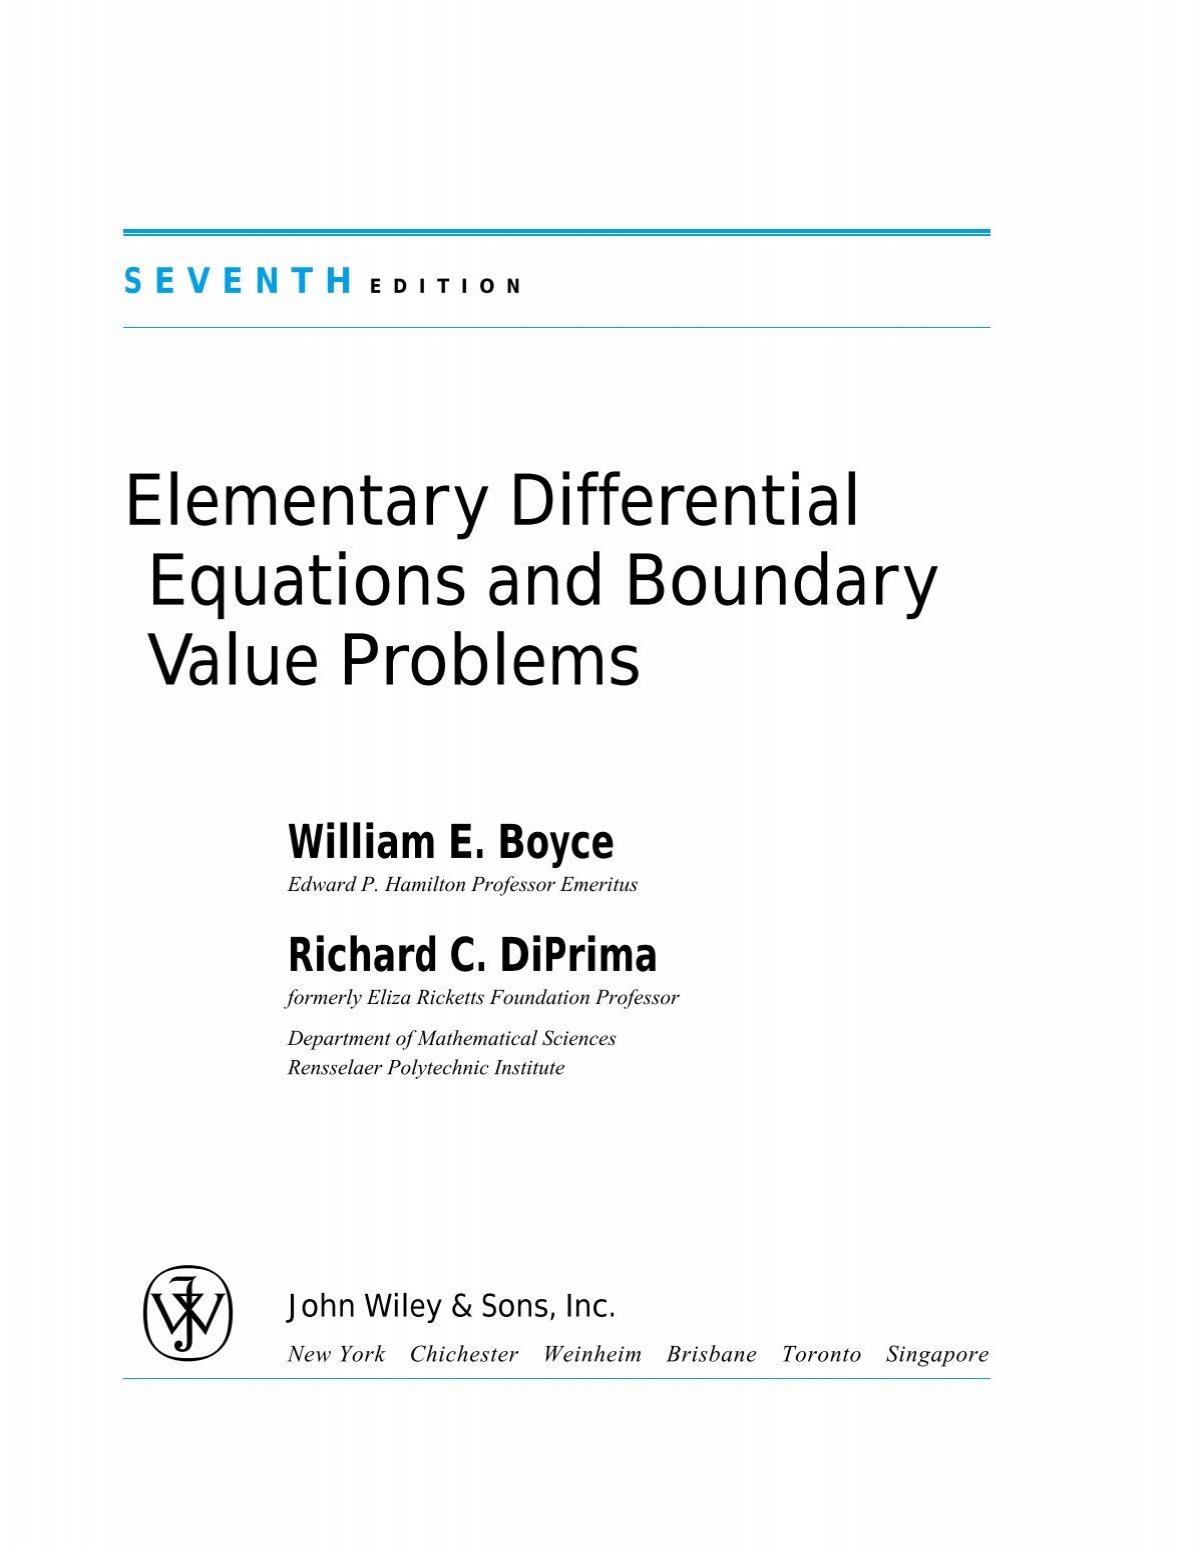 Mathematics - Elementary Differential Equations